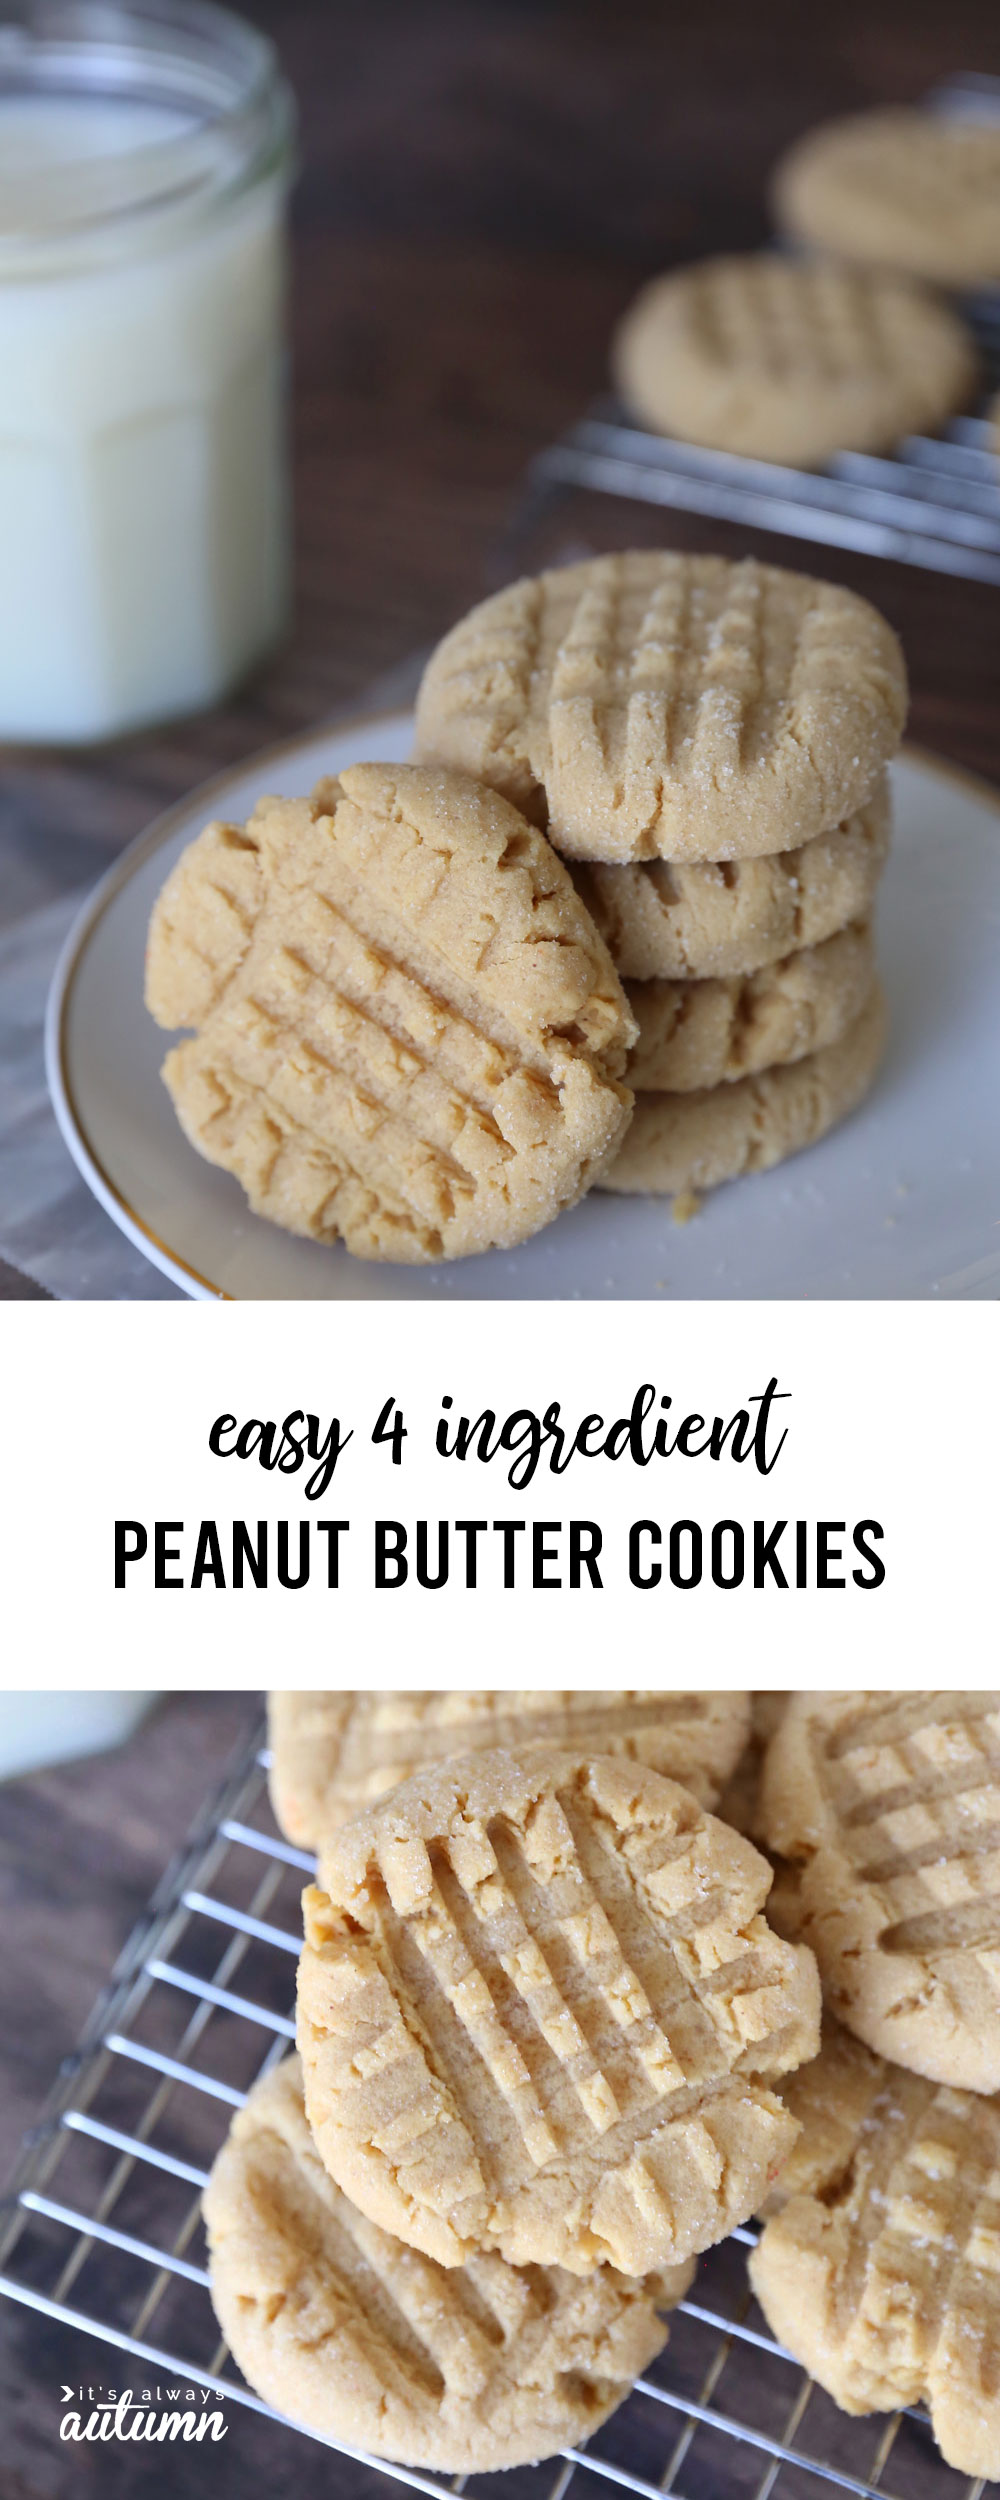 Easy four ingredient peanut butter cookies